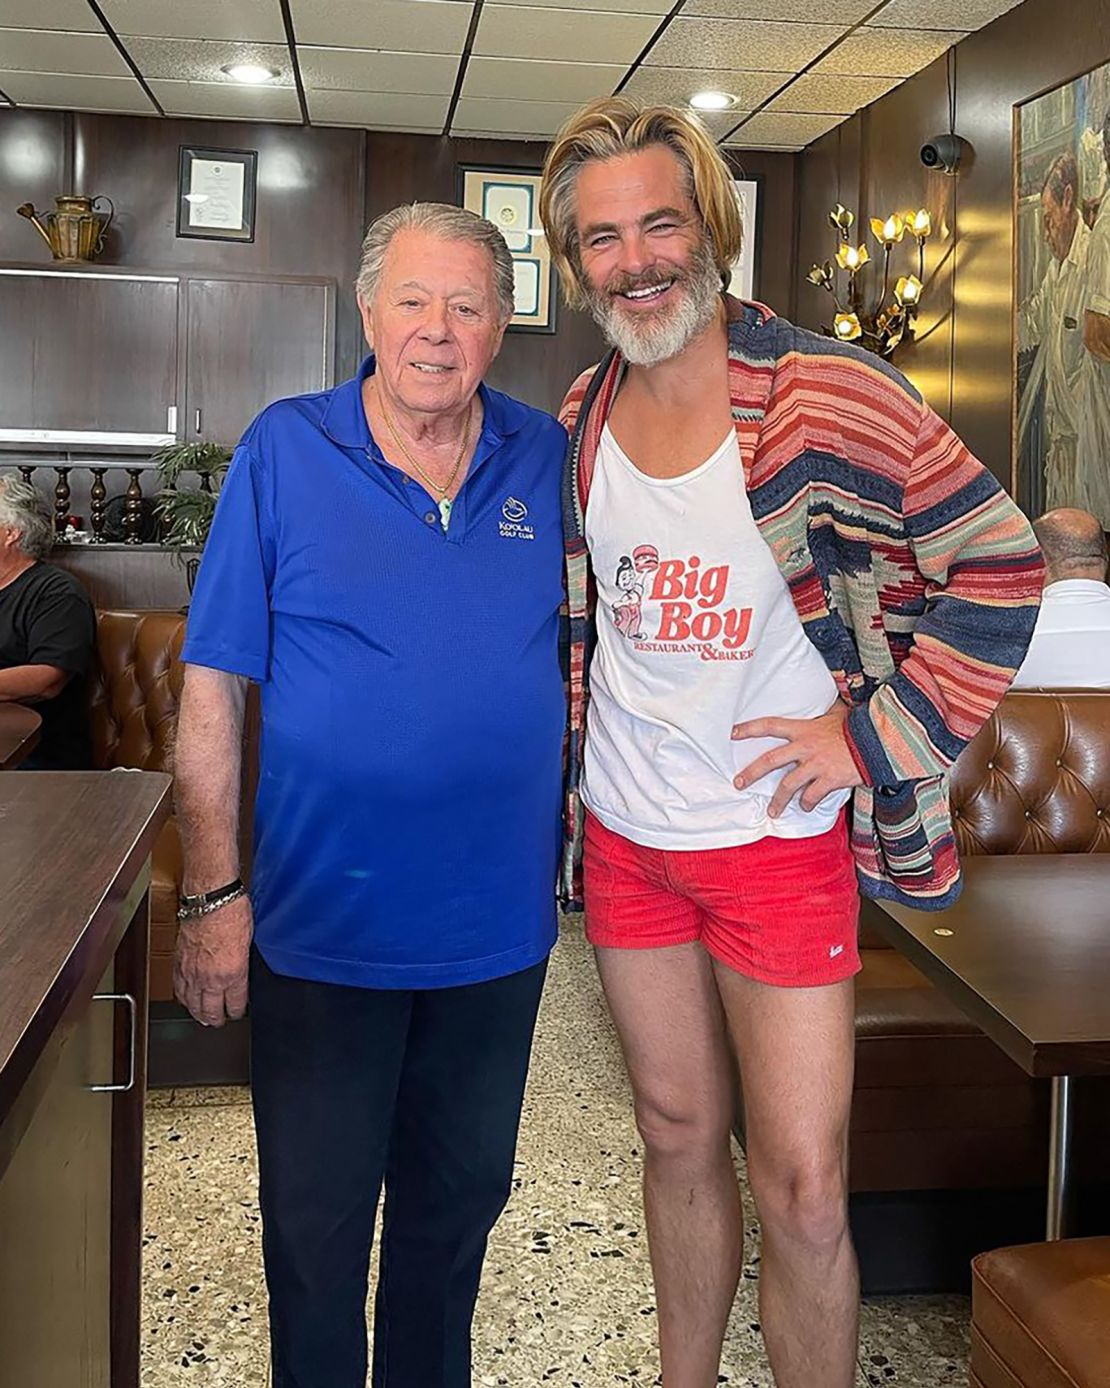 In a vintage "Big Boy" tee and short shorts combo, Pine is pictured here at Langer's Deli in Los Angeles, in a photo the deli <a href="index.php?page=&url=https%3A%2F%2Fwww.instagram.com%2Fp%2FC54K2mwvCyX%2F" target="_blank">shared on Instagram</a> on April 17.